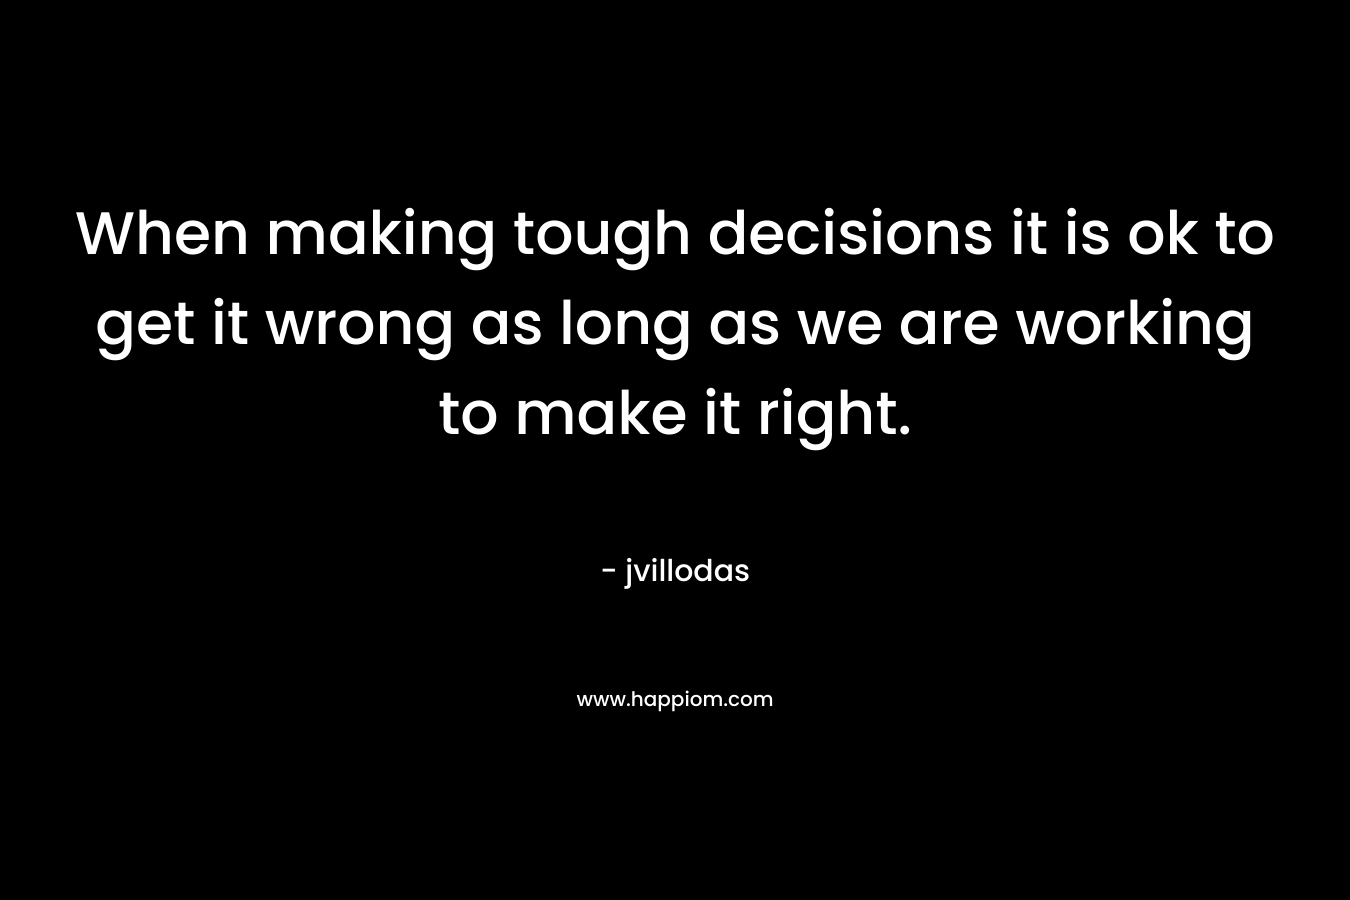 When making tough decisions it is ok to get it wrong as long as we are working to make it right.